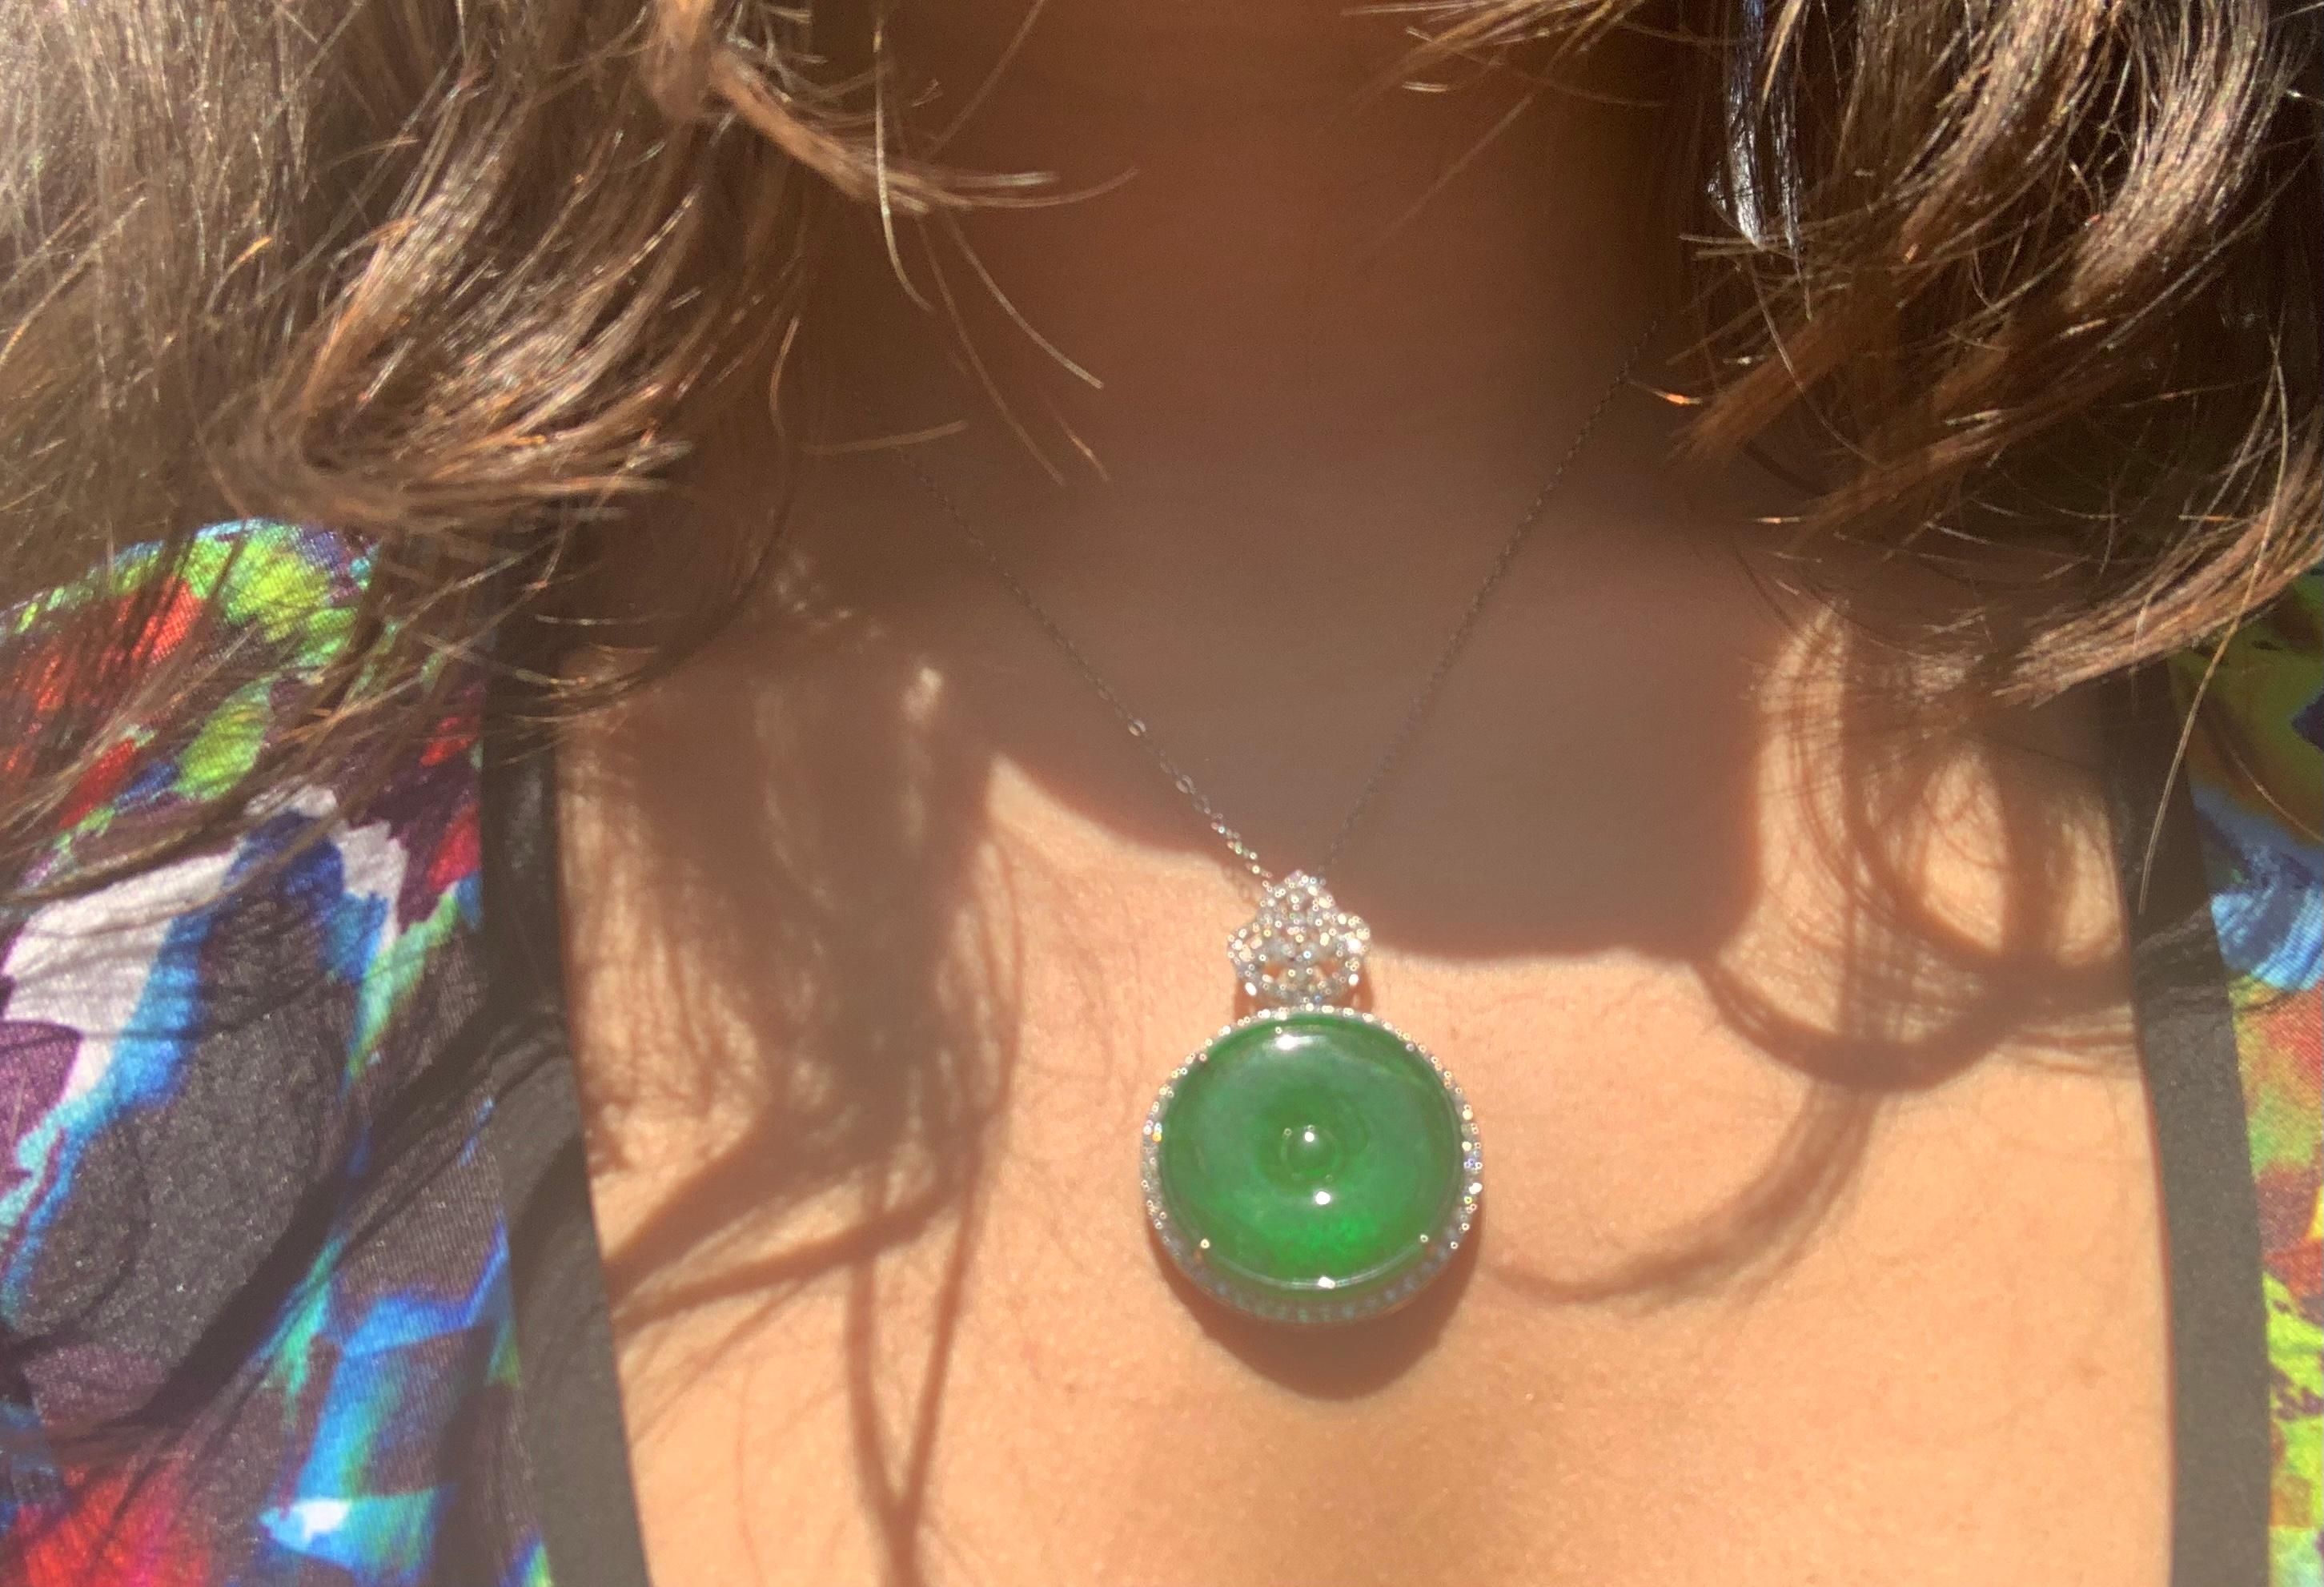 Estate sourced fine natural green jade disc pendant mounted in 18k white gold diamond encrusted setting. The back engraved with a scrolled foliate motif by a master goldsmith. 75 round and 3 marquise-shaped diamonds totaling approximately 1.25